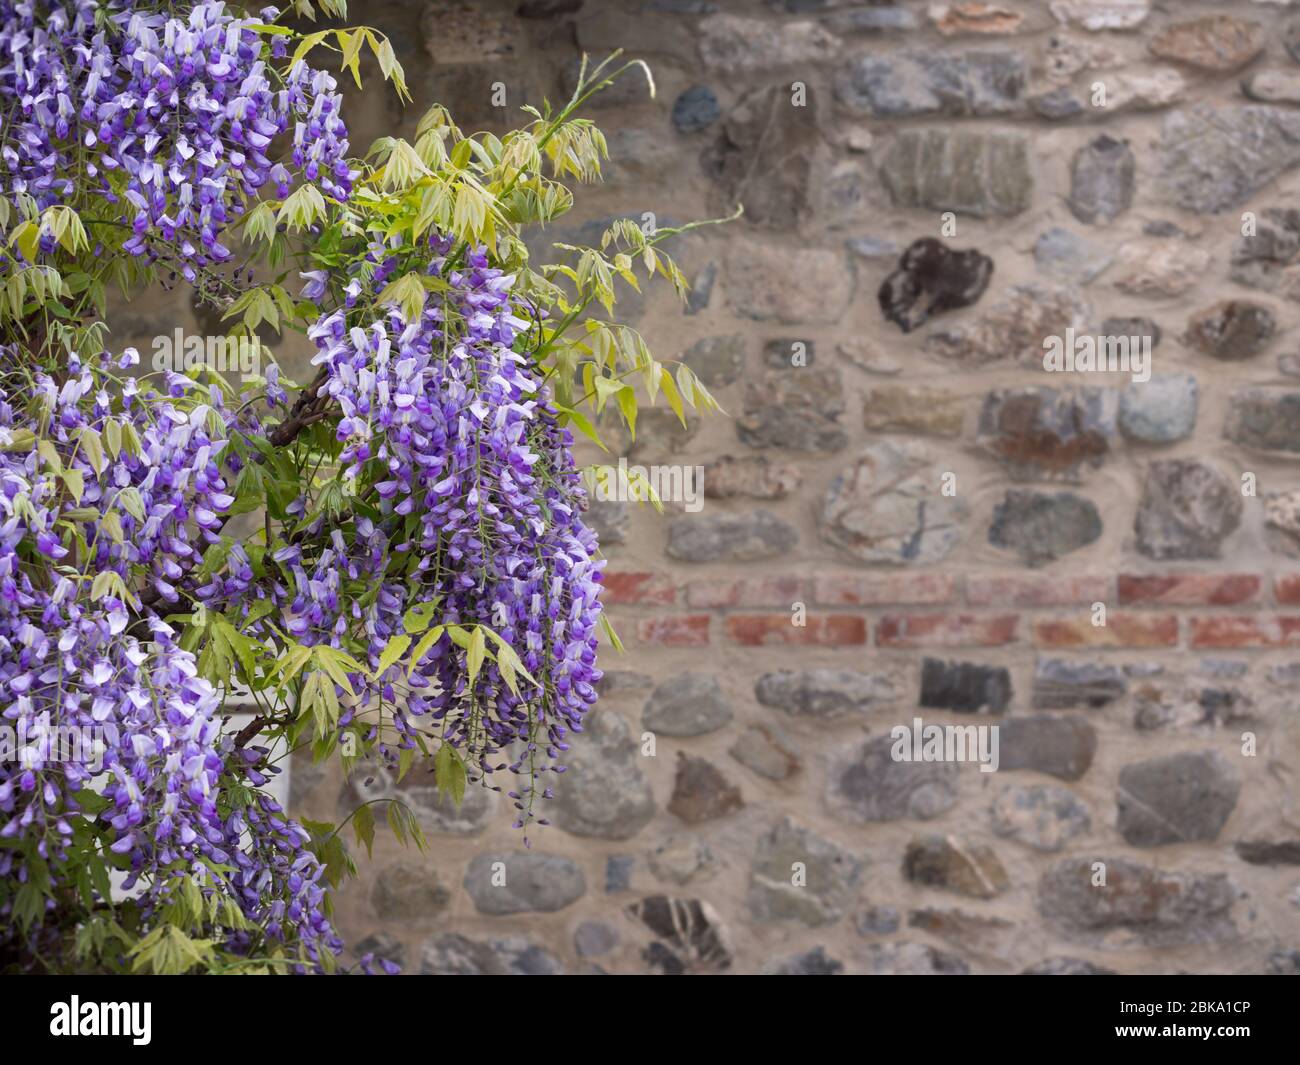 Violet wisteria flowers with stone wall in the background. Stock Photo